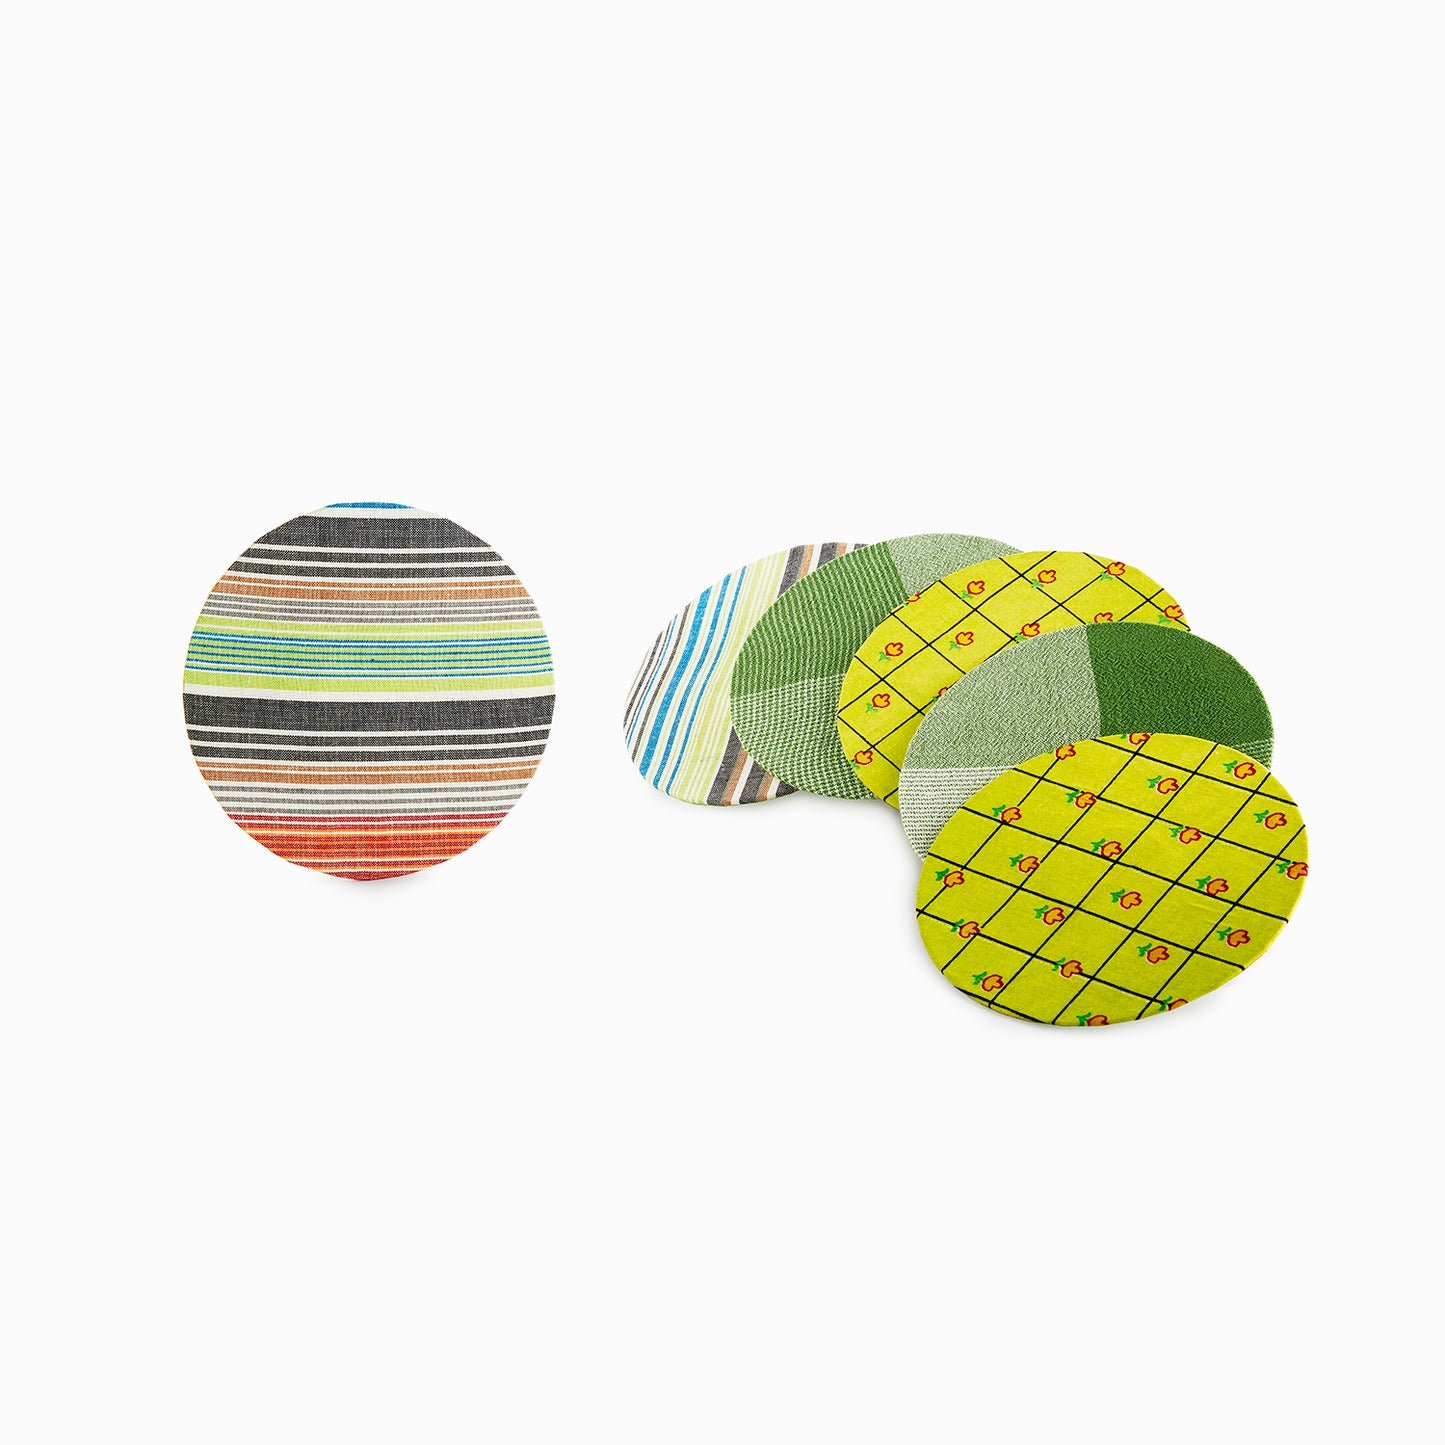 Set of 6 - Designer Fabric of Old CDs Coasters